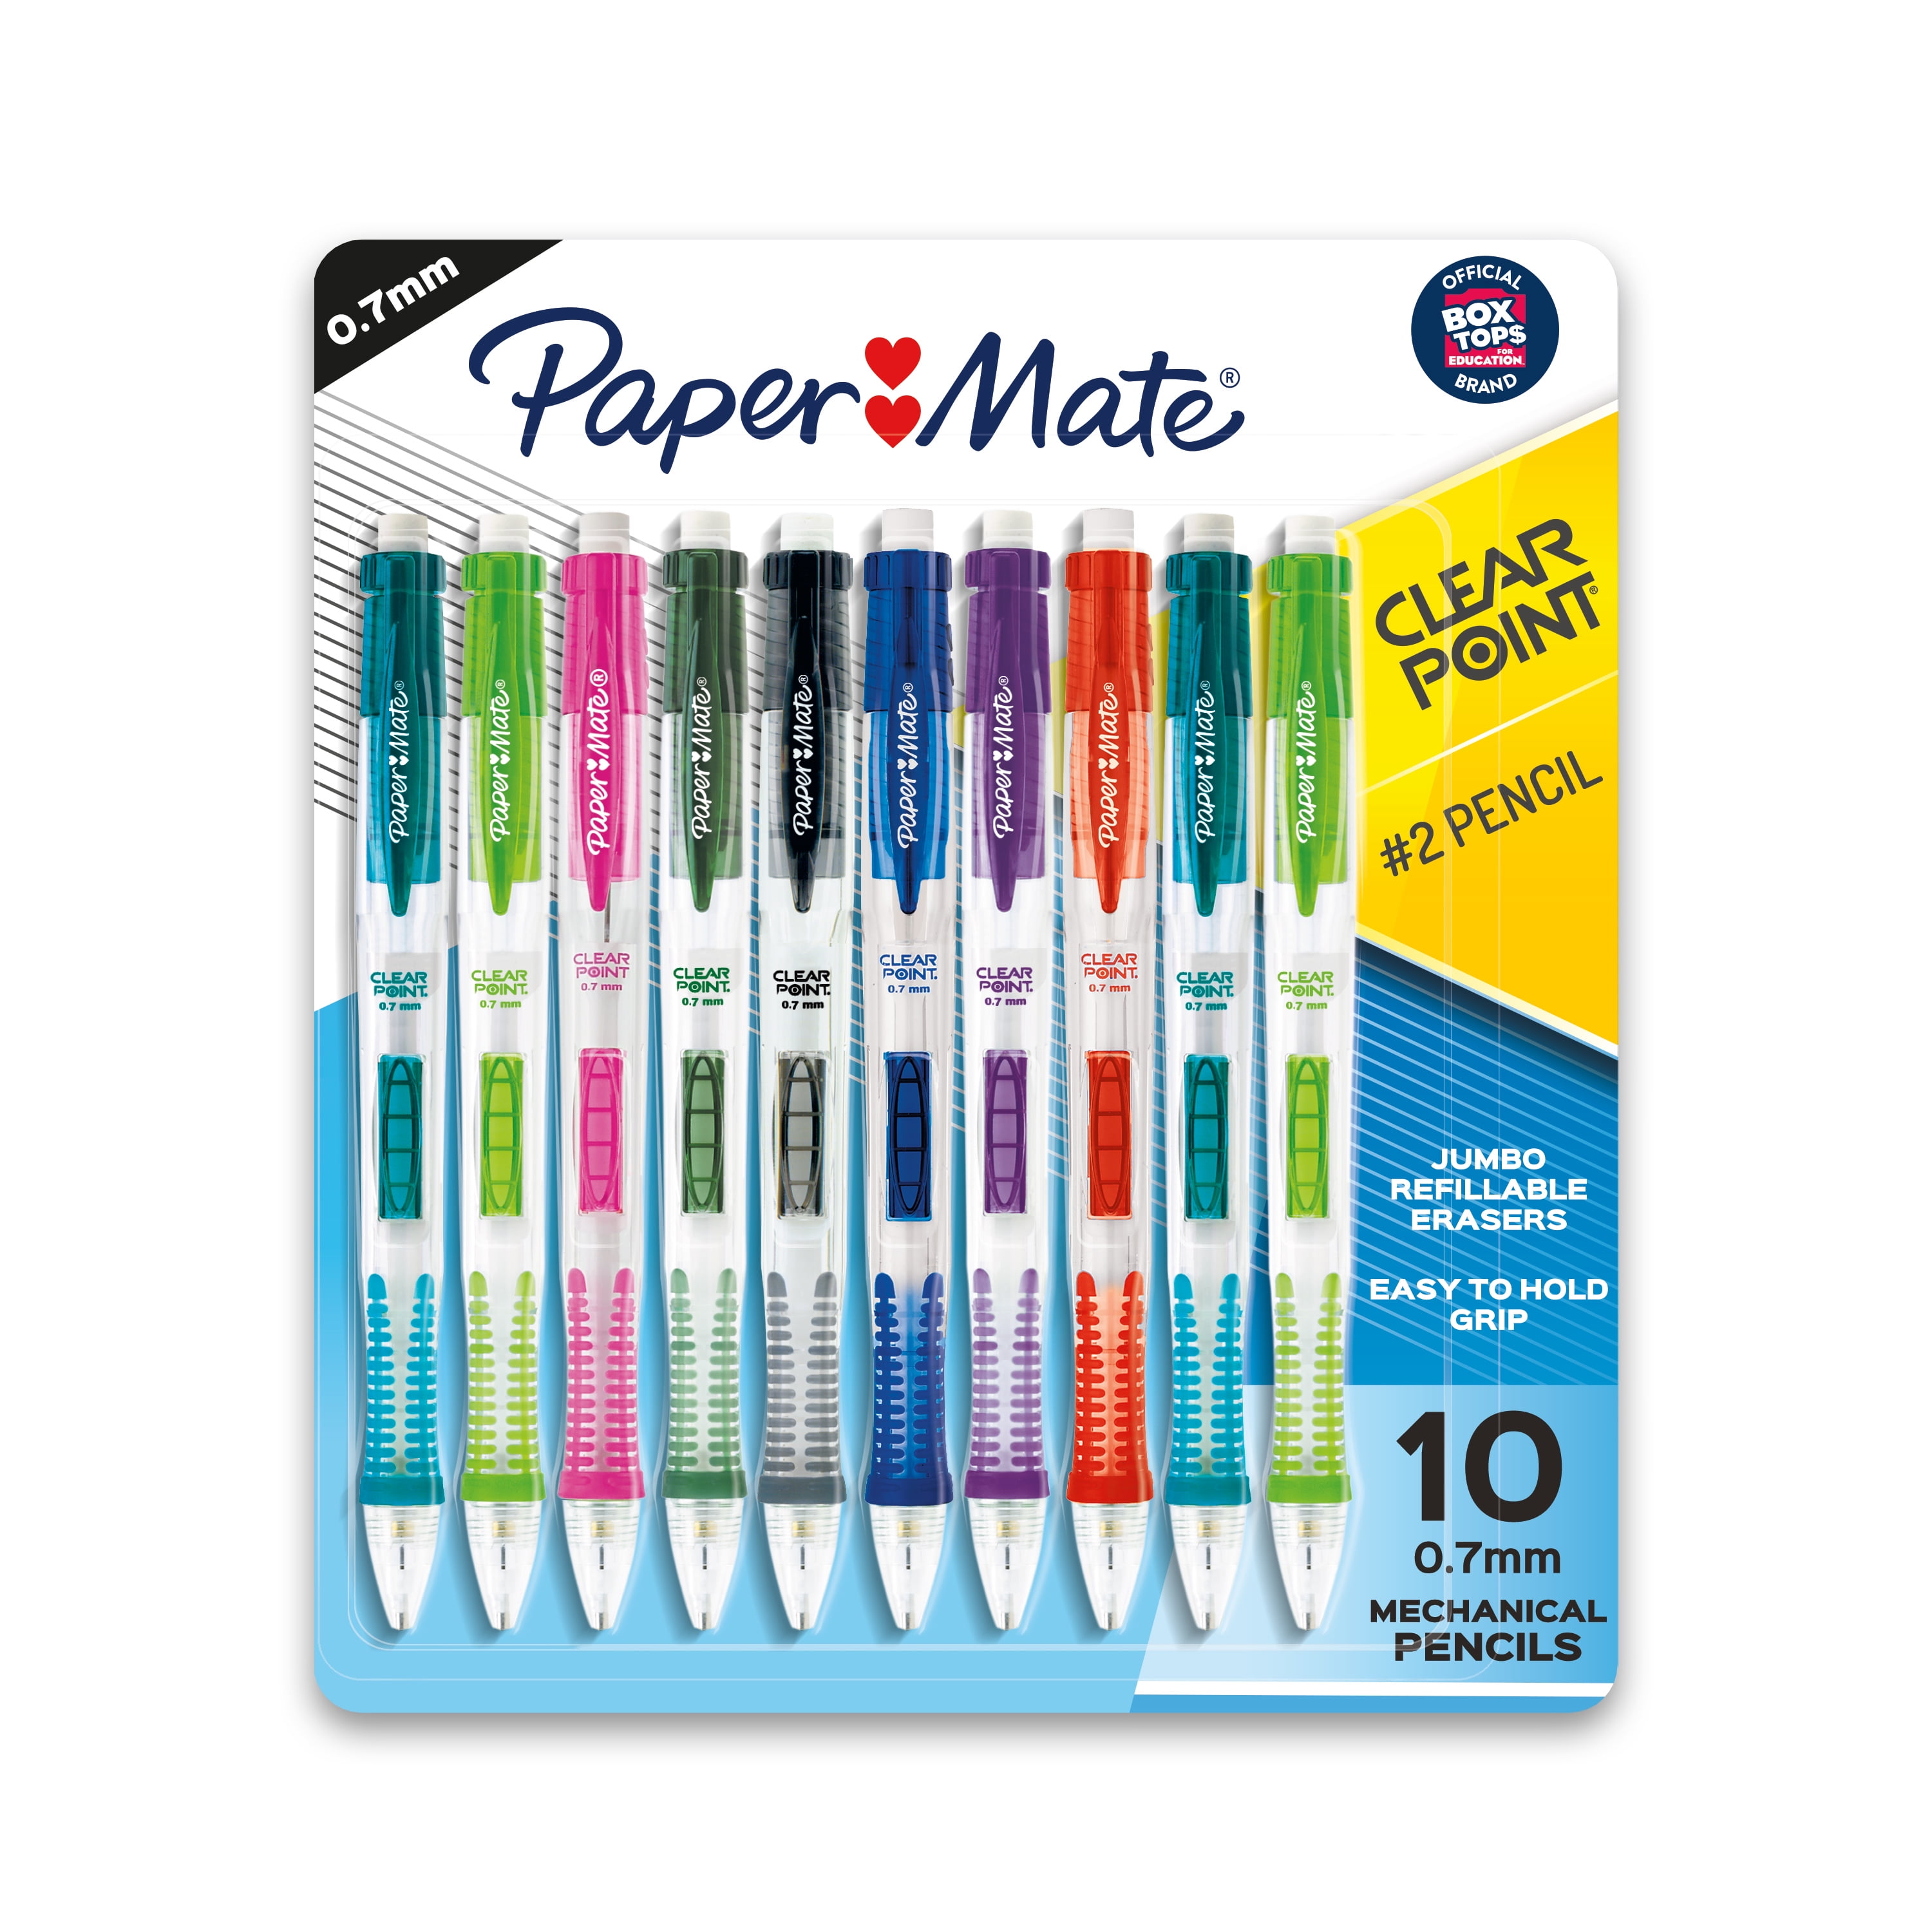 Paper Mate Clearpoint Mechanical Pencil, 0.7 mm, Assorted Barrel, Refillable, 10 Count